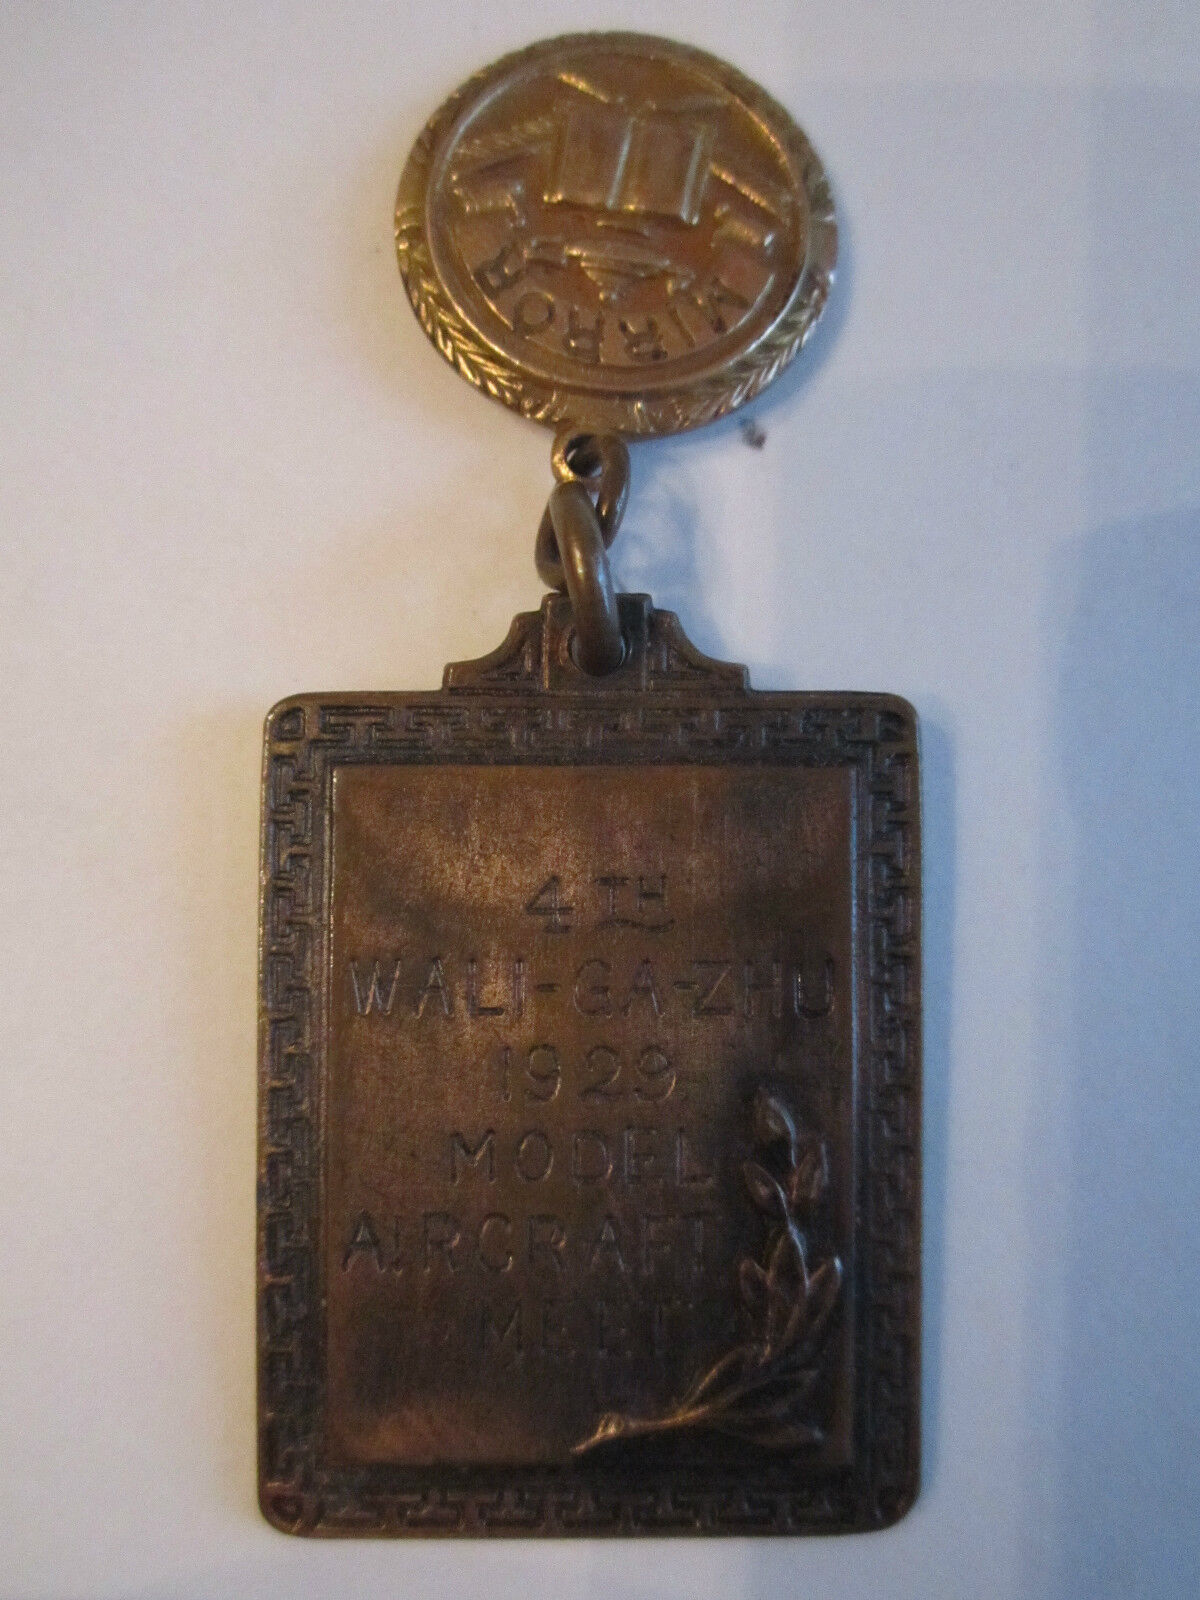 1929 4TH ANNUAL WALI-GA-ZHU MEDAL - SECOND PRIZE - GOLD FILLED STAMPED -  TUB RR